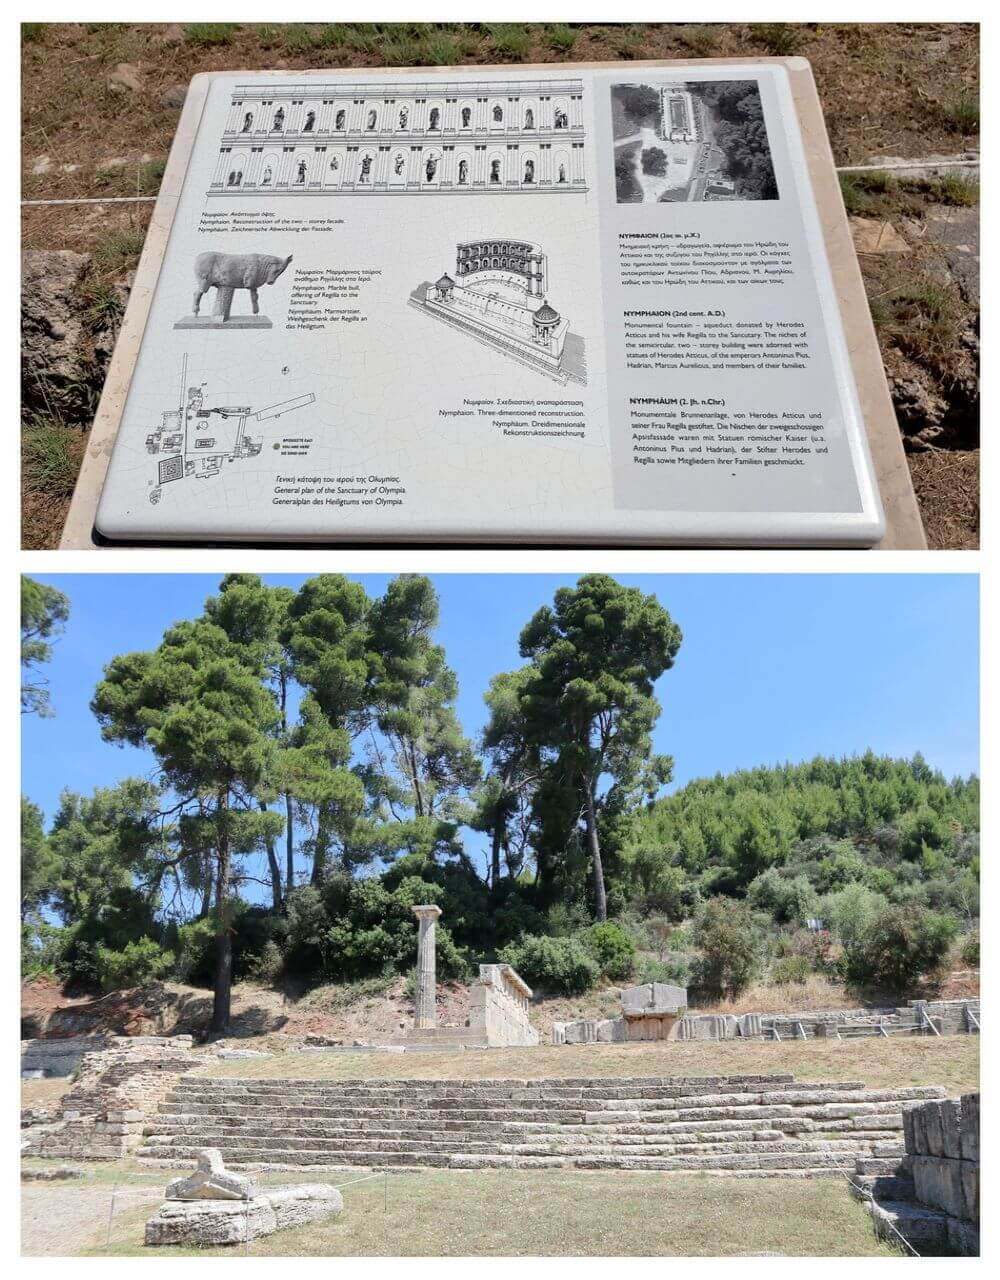 The Nymphaion, ancient Olympia